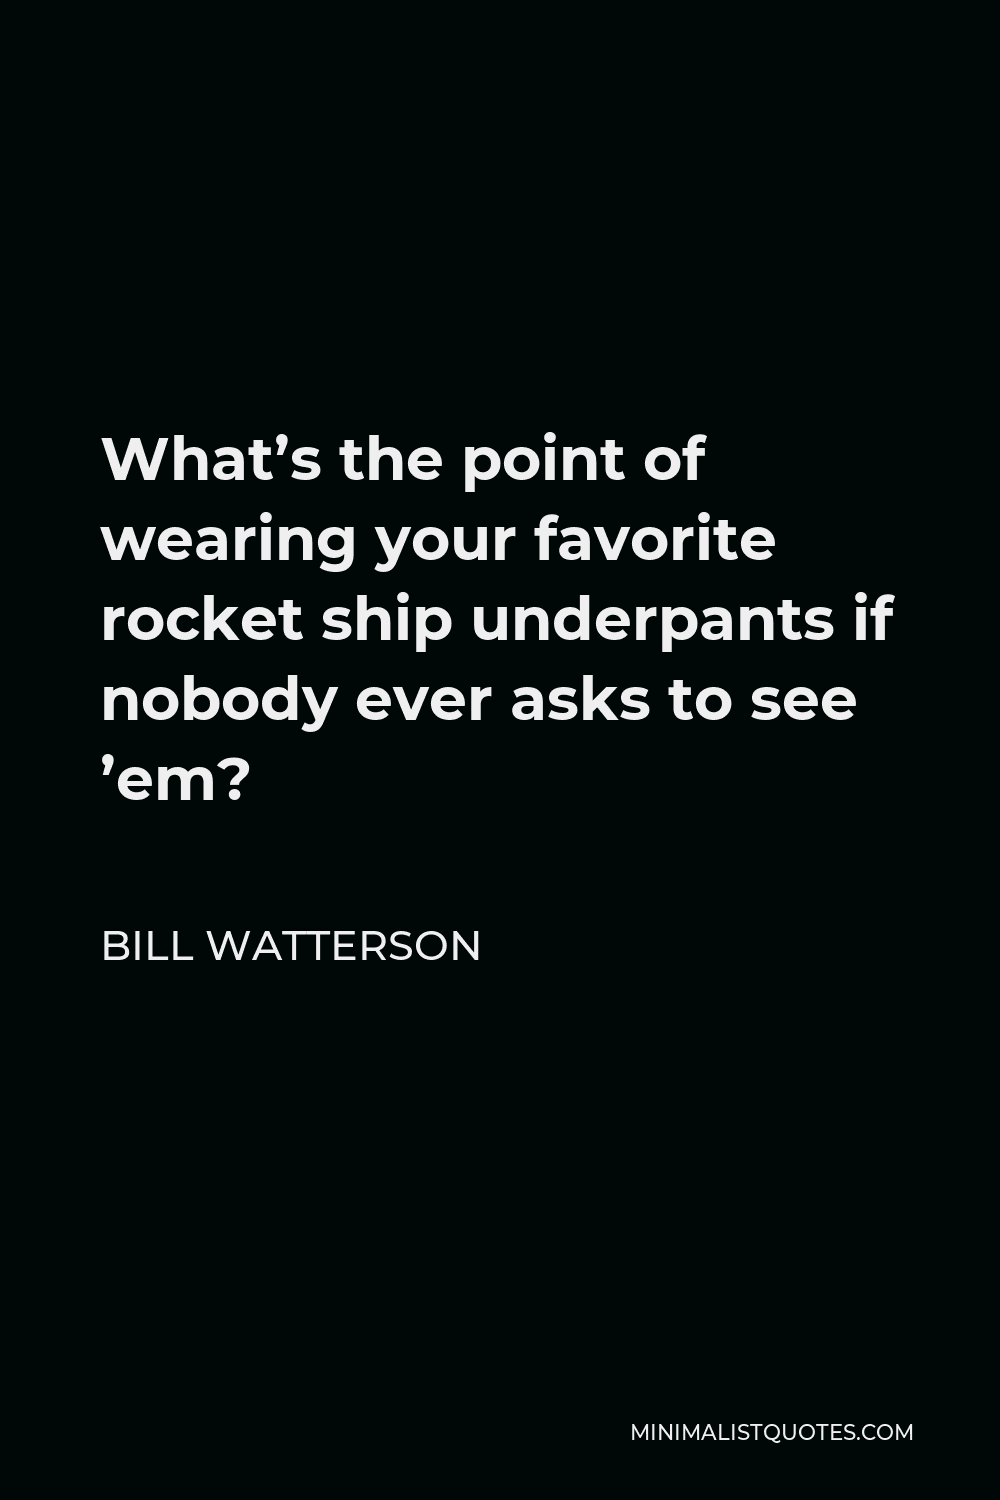 Bill Watterson Quote - What’s the point of wearing your favorite rocket ship underpants if nobody ever asks to see ’em?